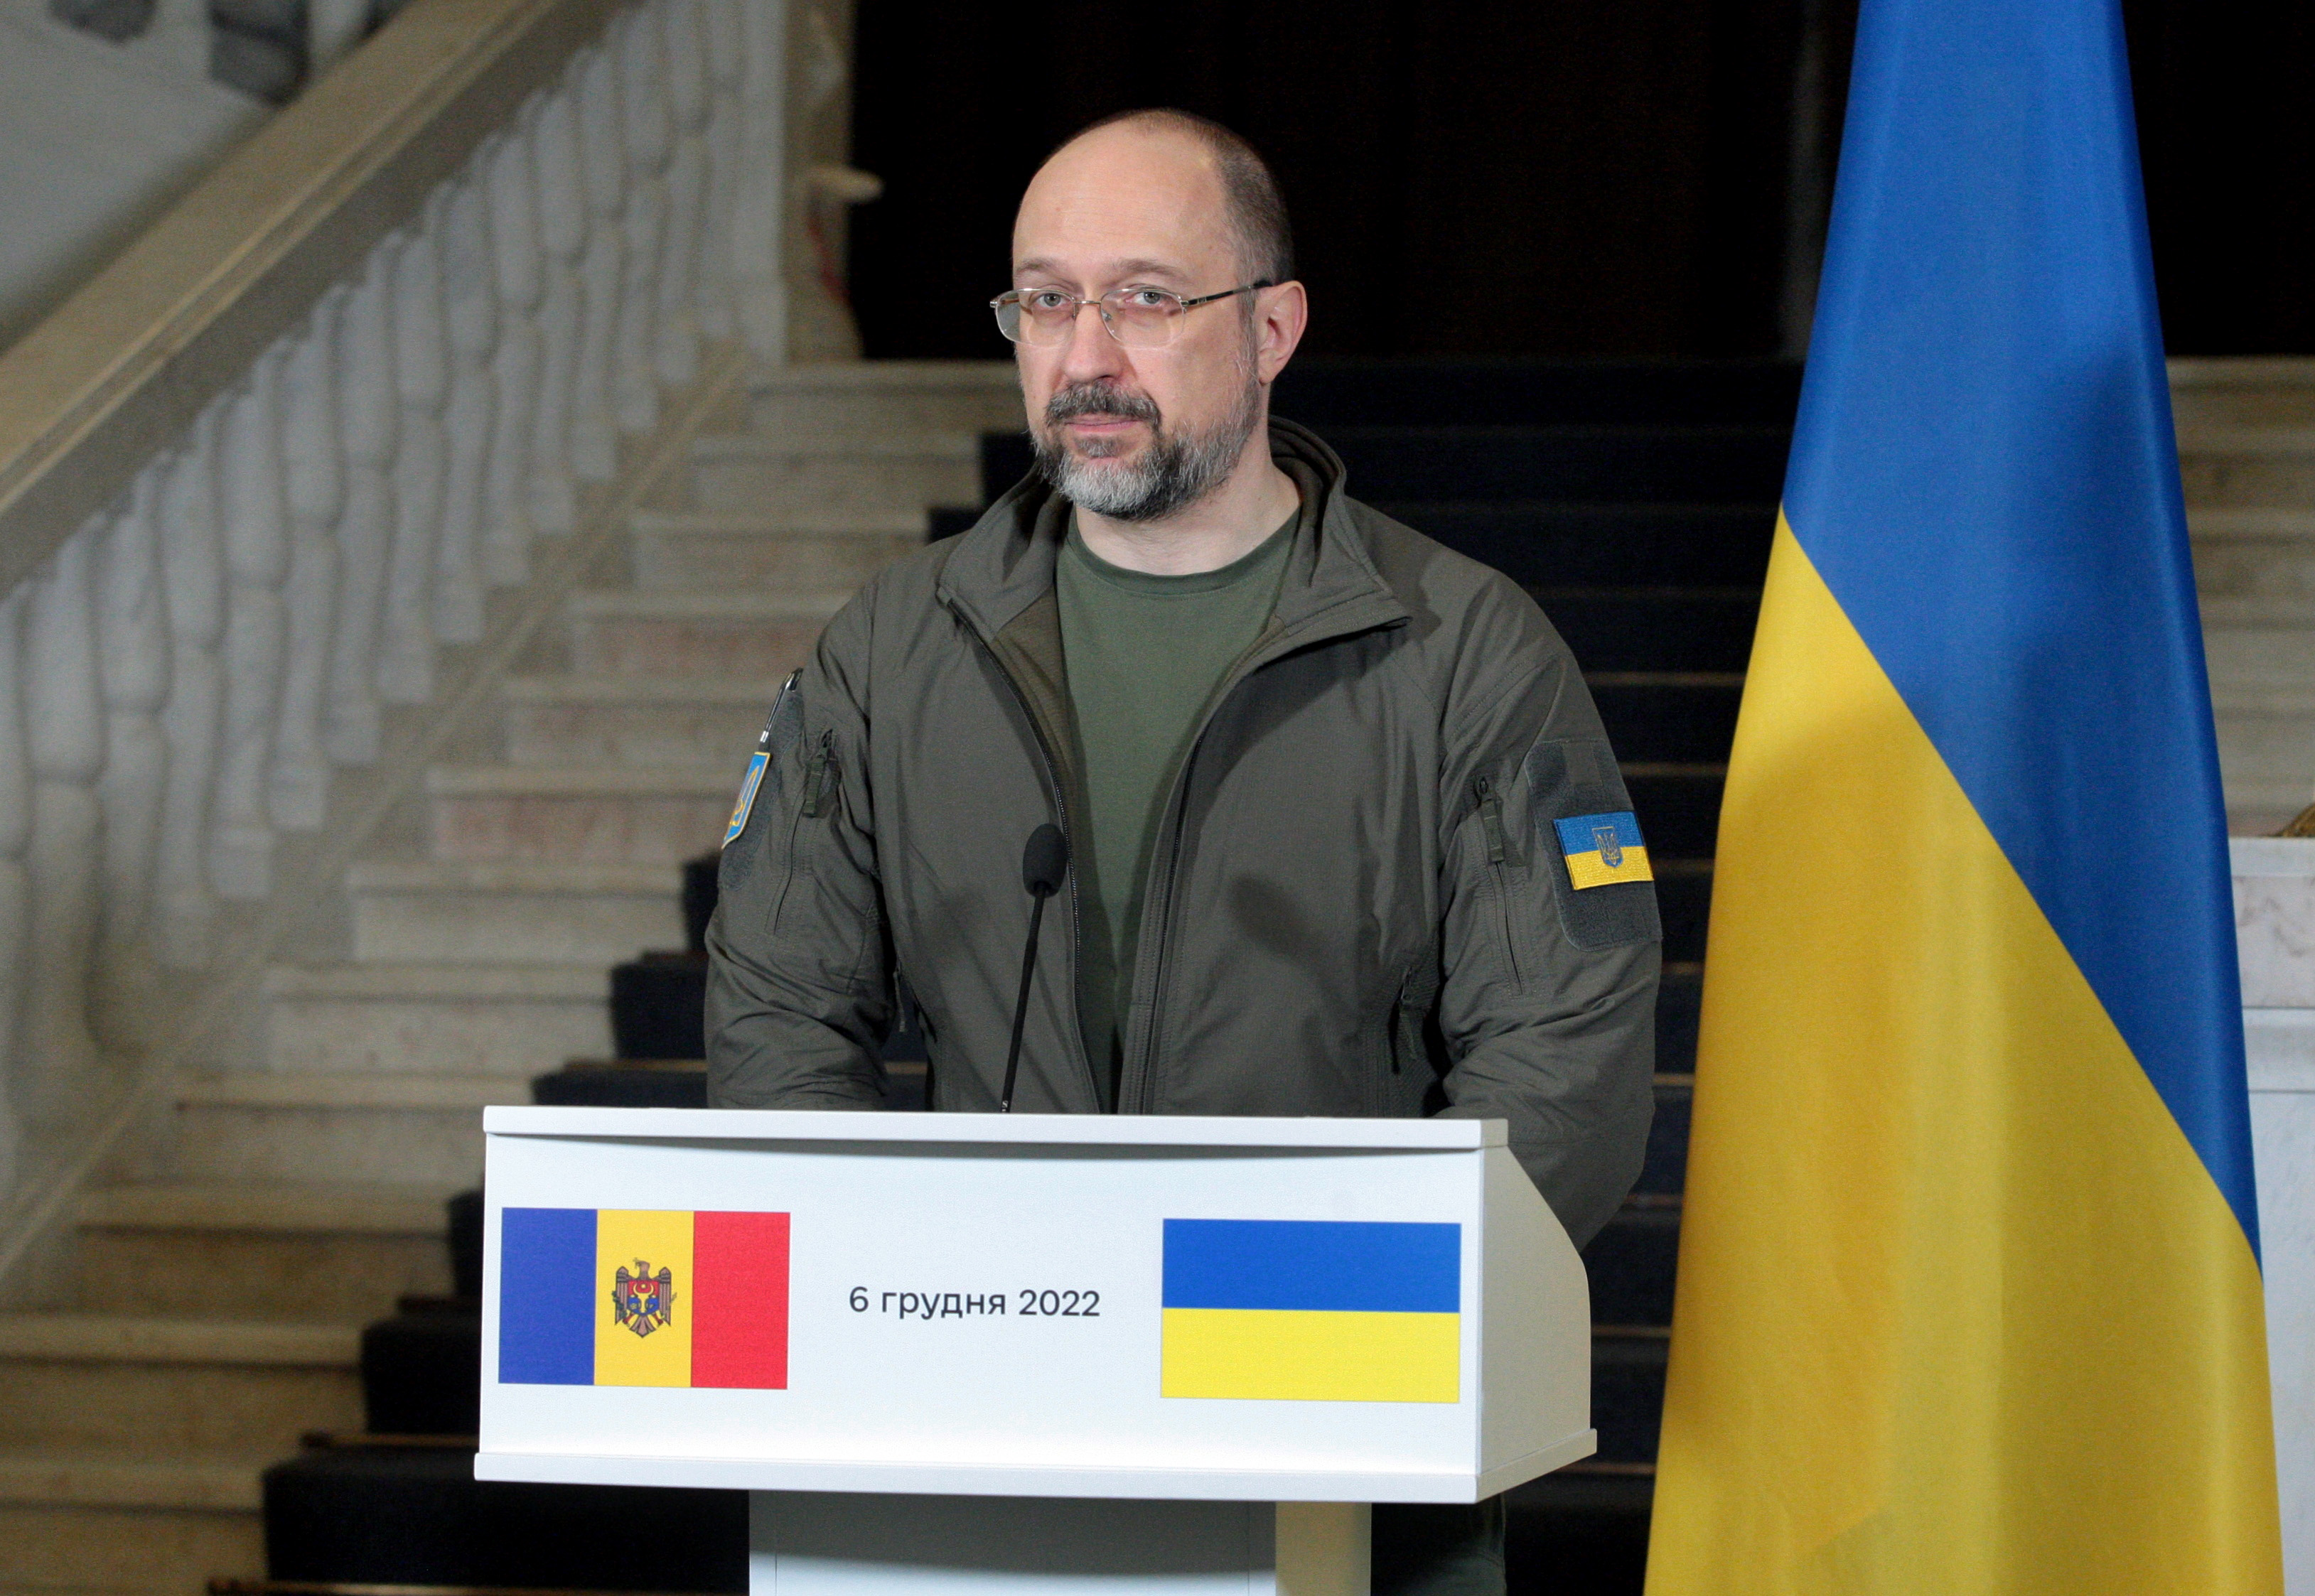 Denys Shmyhal attends a joint briefing in Kyiv on December 6.